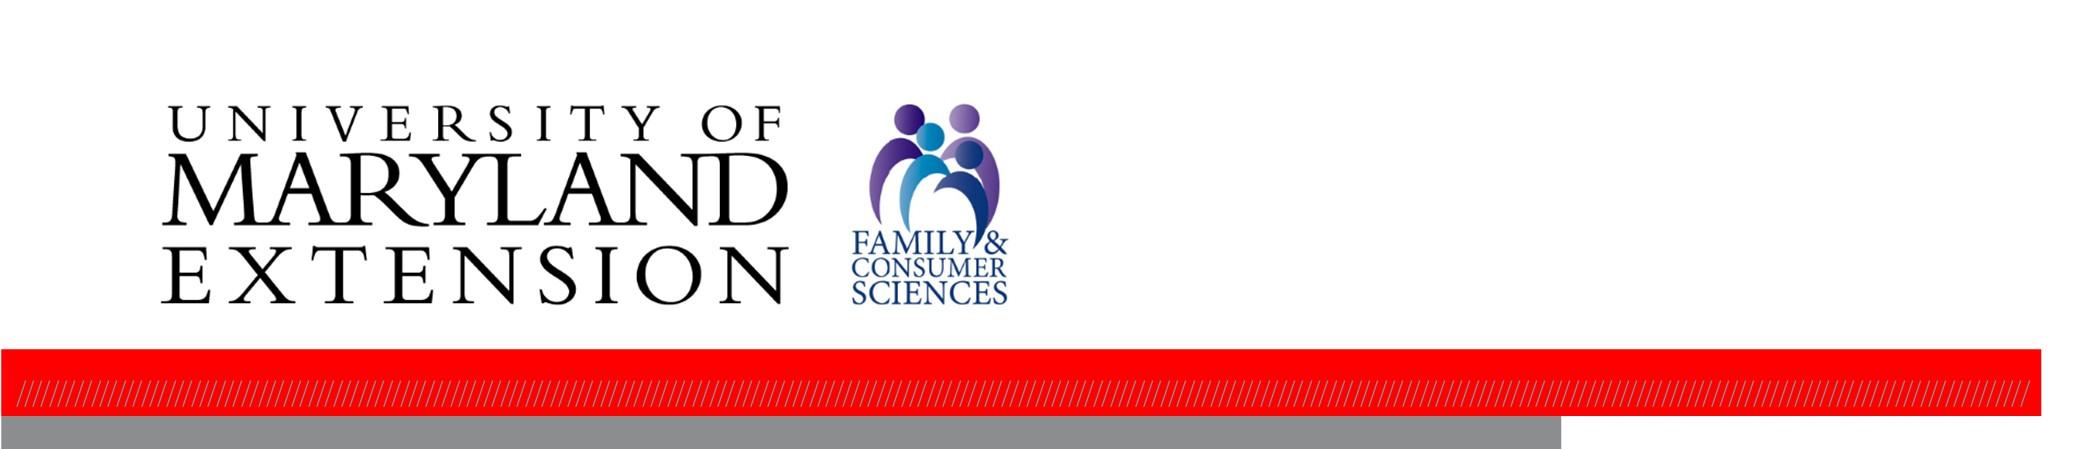 Publication header containing the University of Maryland Extension and Family Consumer & Sciences logos